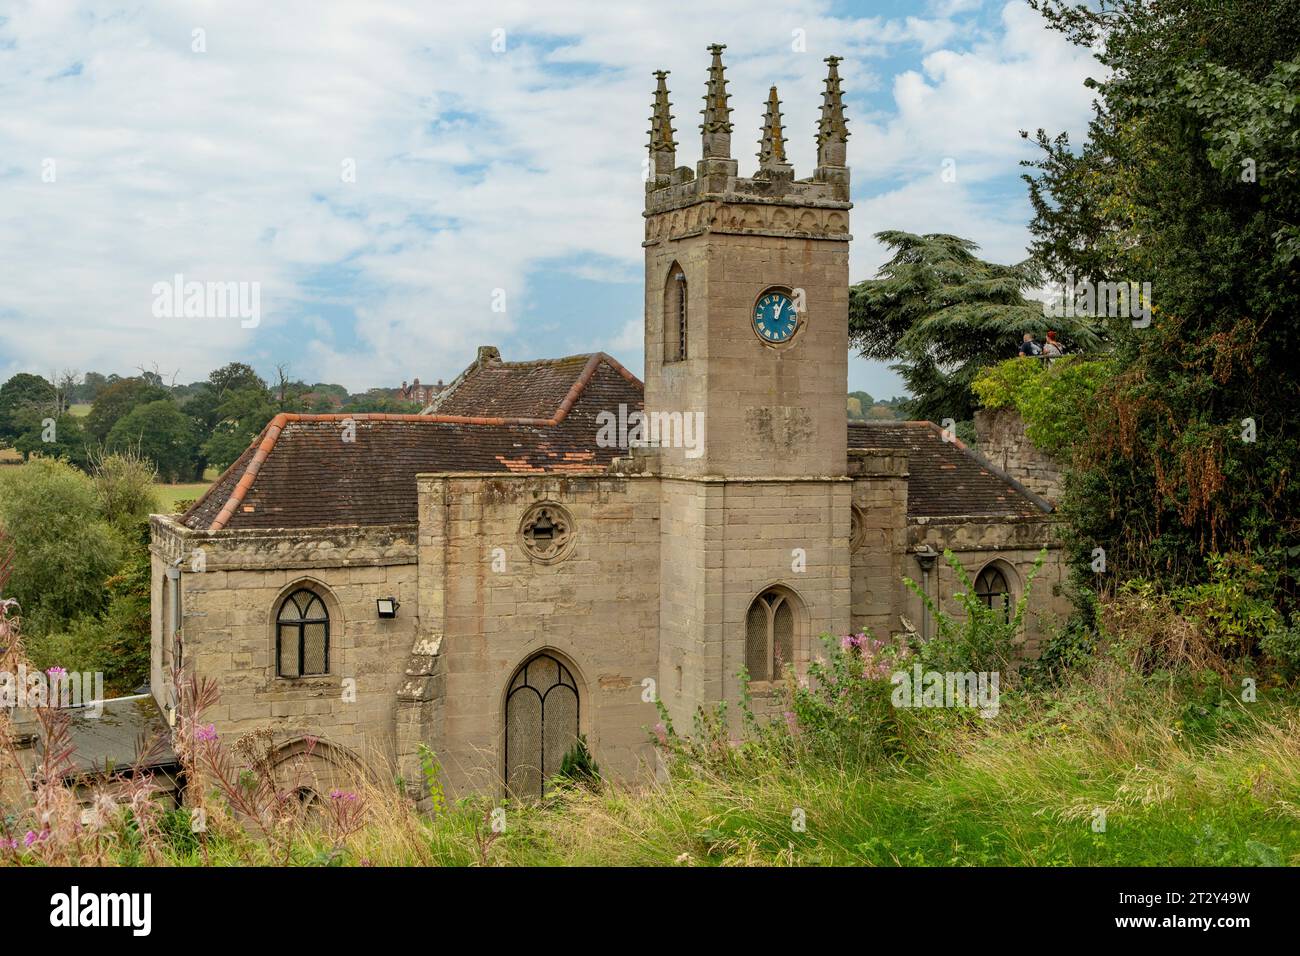 Chapelle de St Mary Magdalene, Guys Cliffe House, Warwick, Warwickshire, Angleterre Banque D'Images